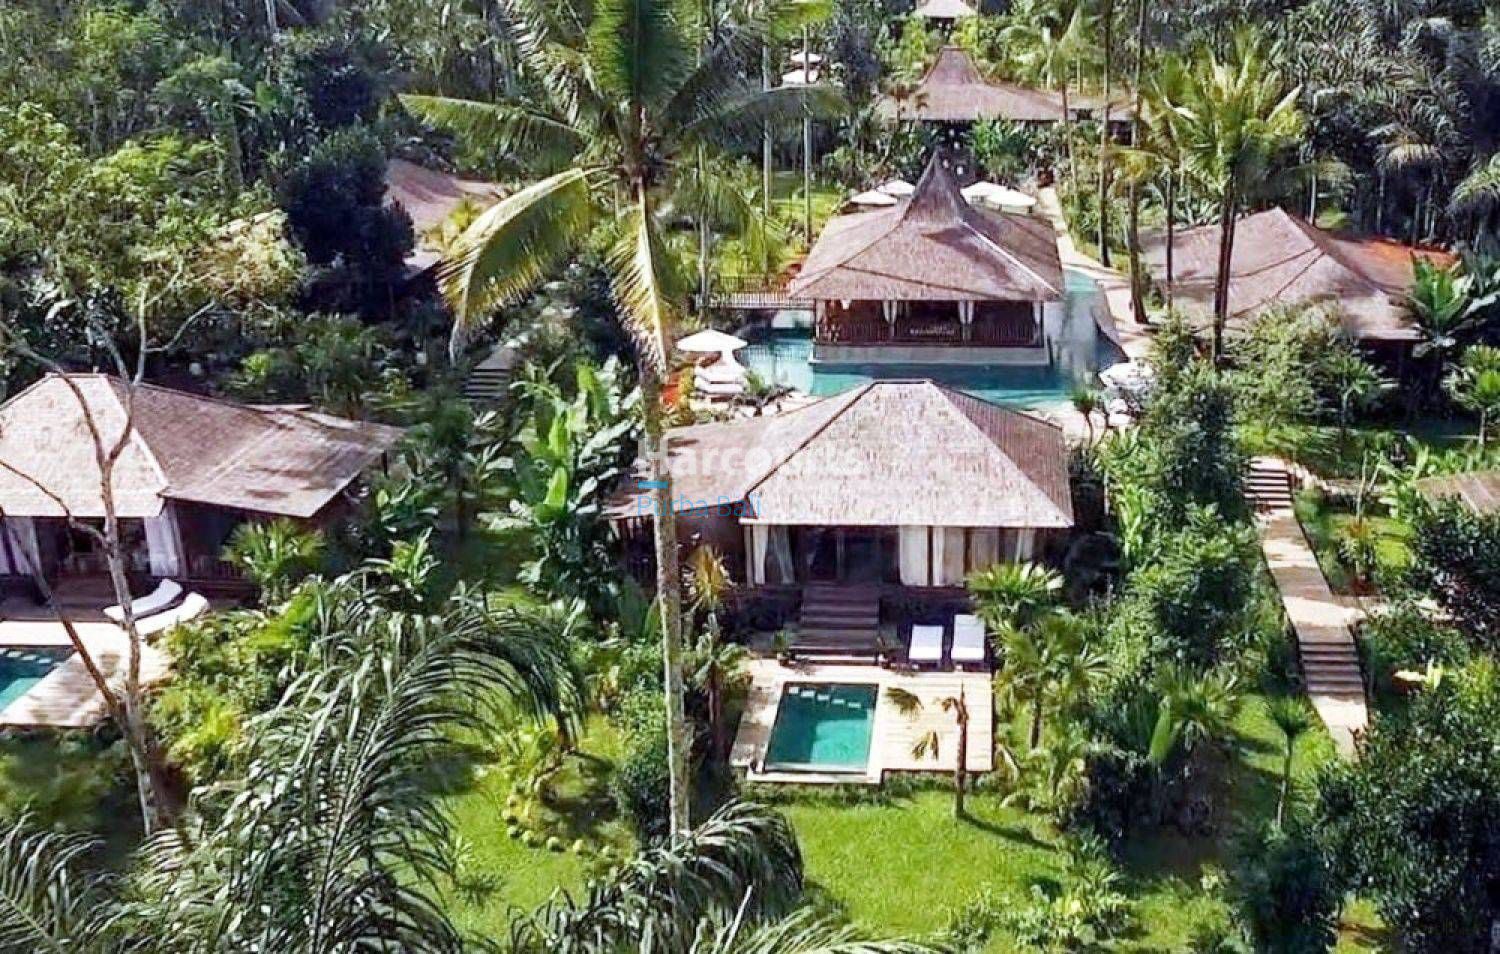 Bali villas for sale: Freehold for Foreigners Explained